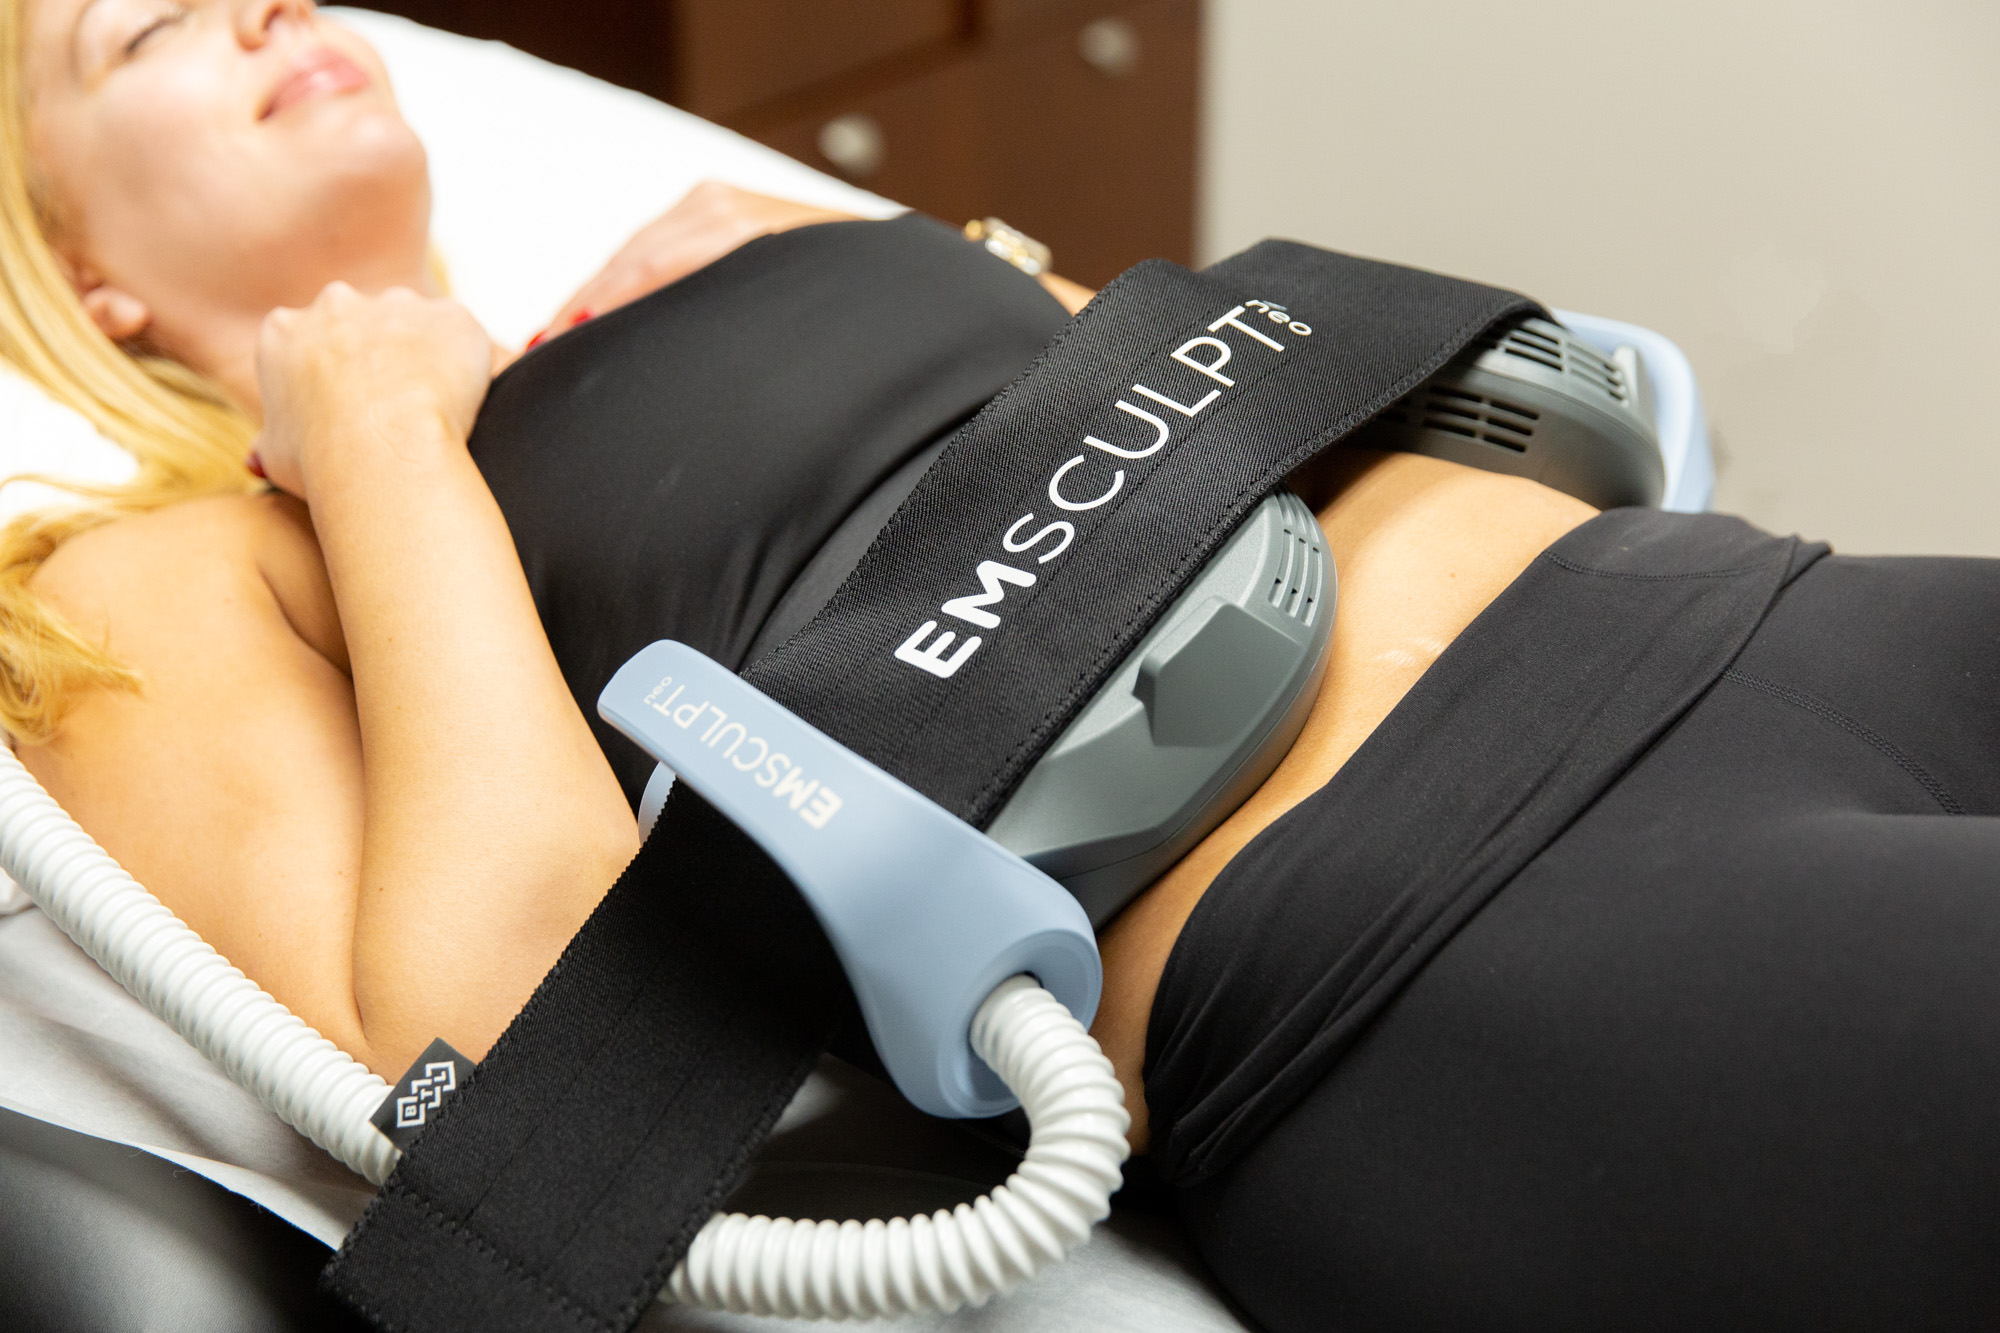 Two Emsculpt NEO applicators are attached to patient's stomach, one on right side and one on left. Patient is laying down with eyes closed during treatment.